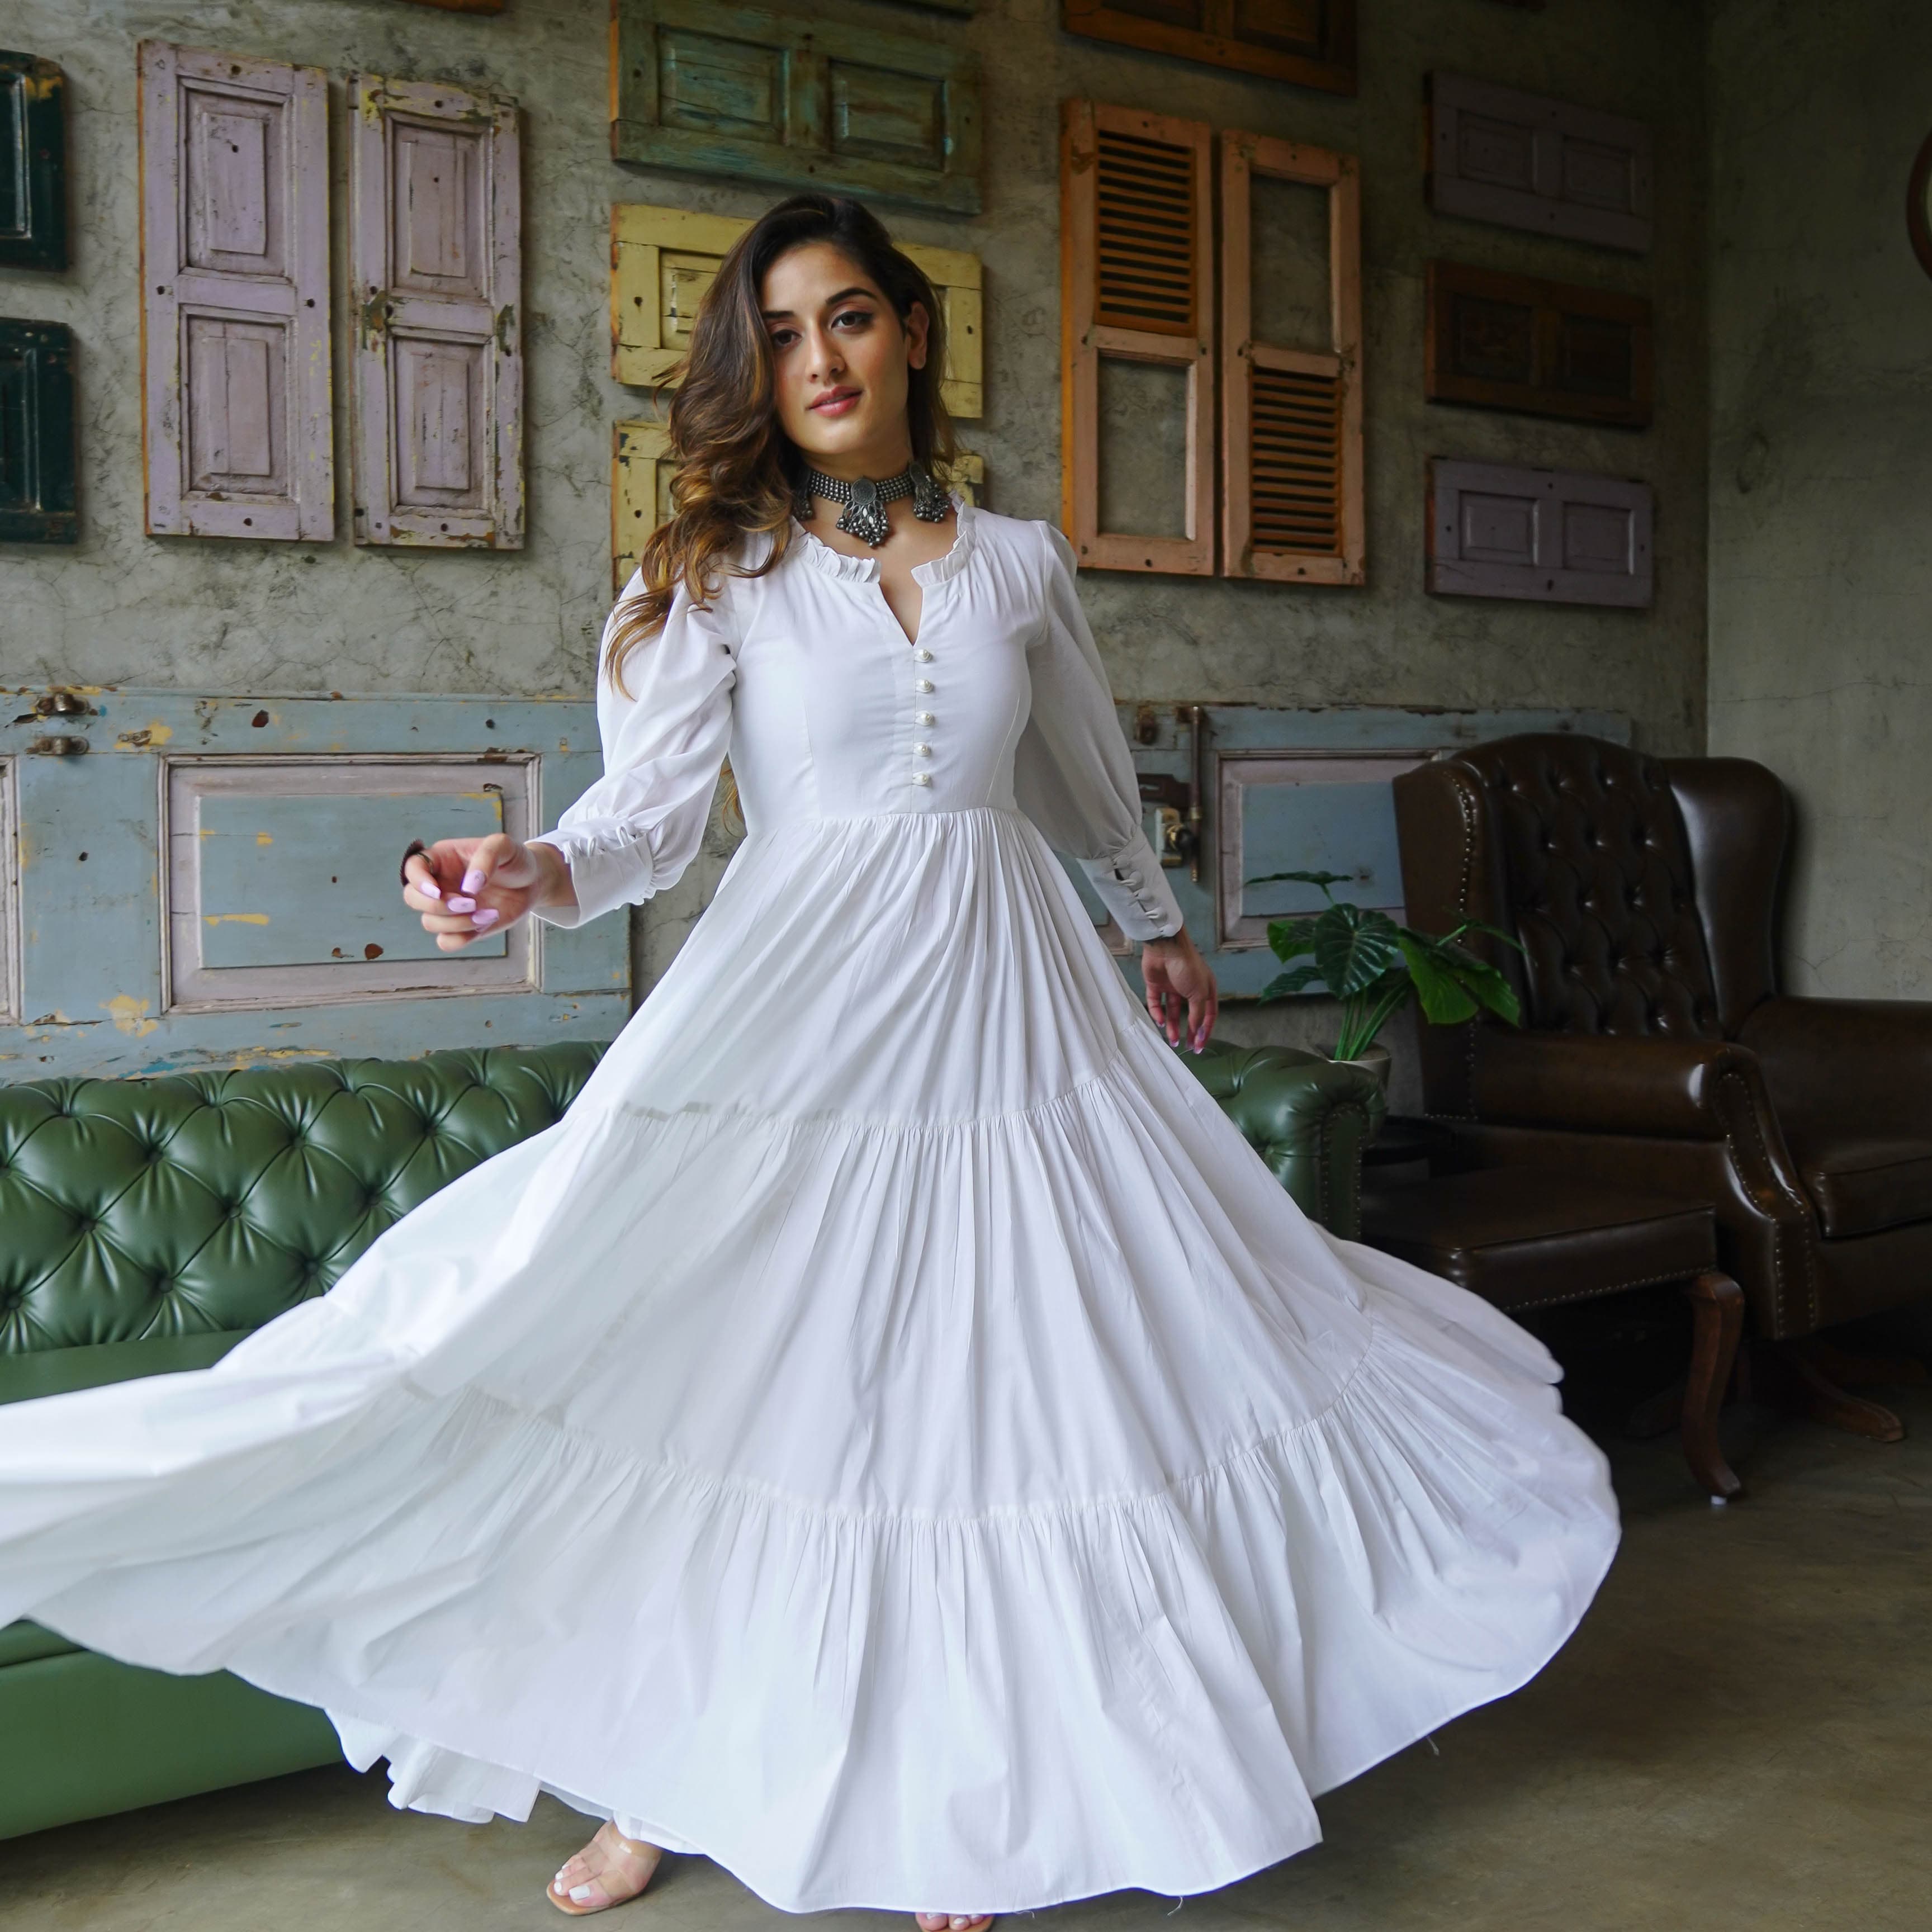 Shop tier tier off white cotton dress for summer from Bebaak